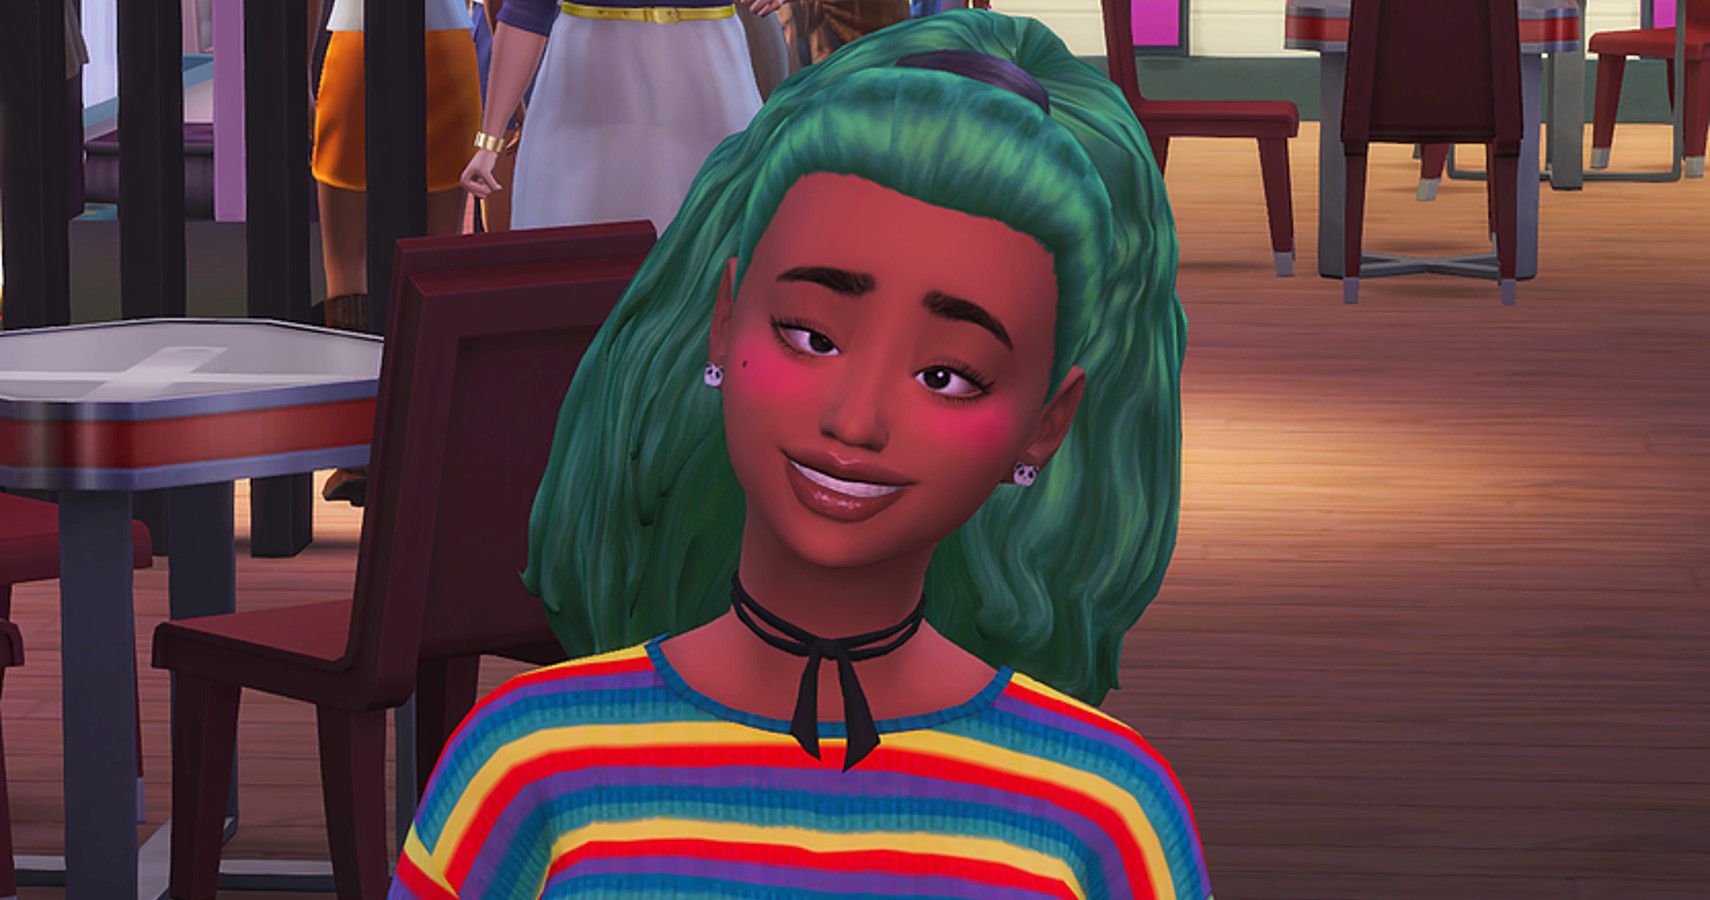 great sims 4 mods